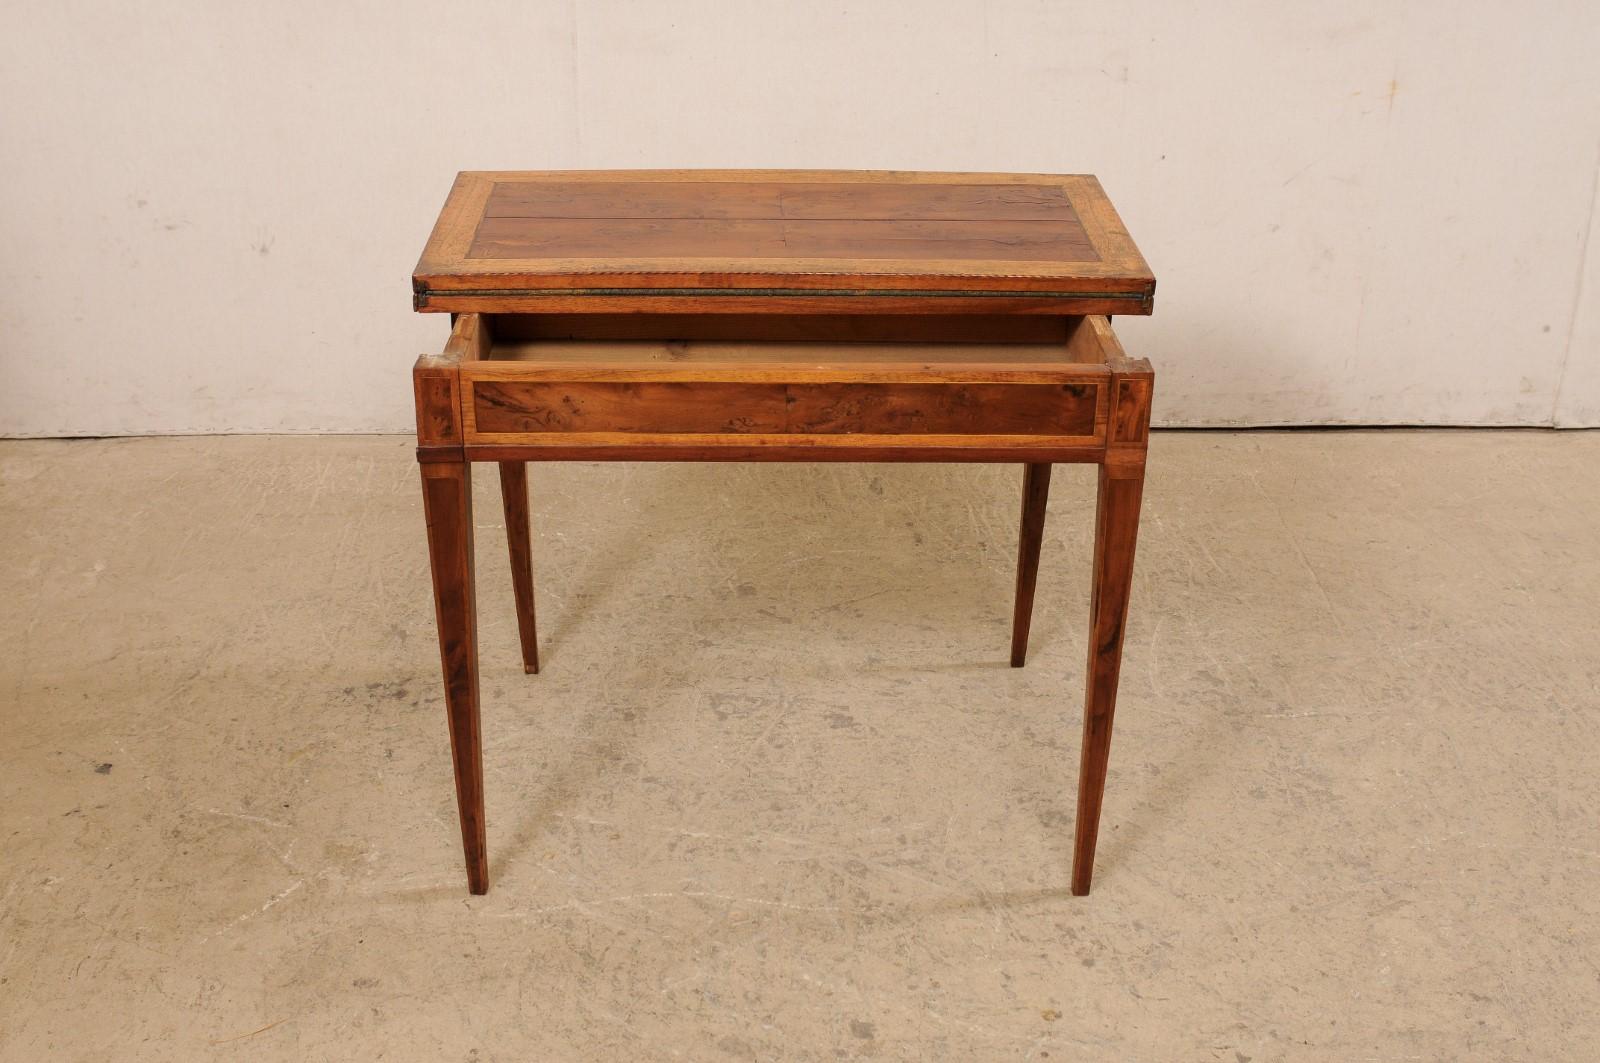 19th C. French Petite-Size Flip Top Table 'Transitional to a Card/Games Table' For Sale 2